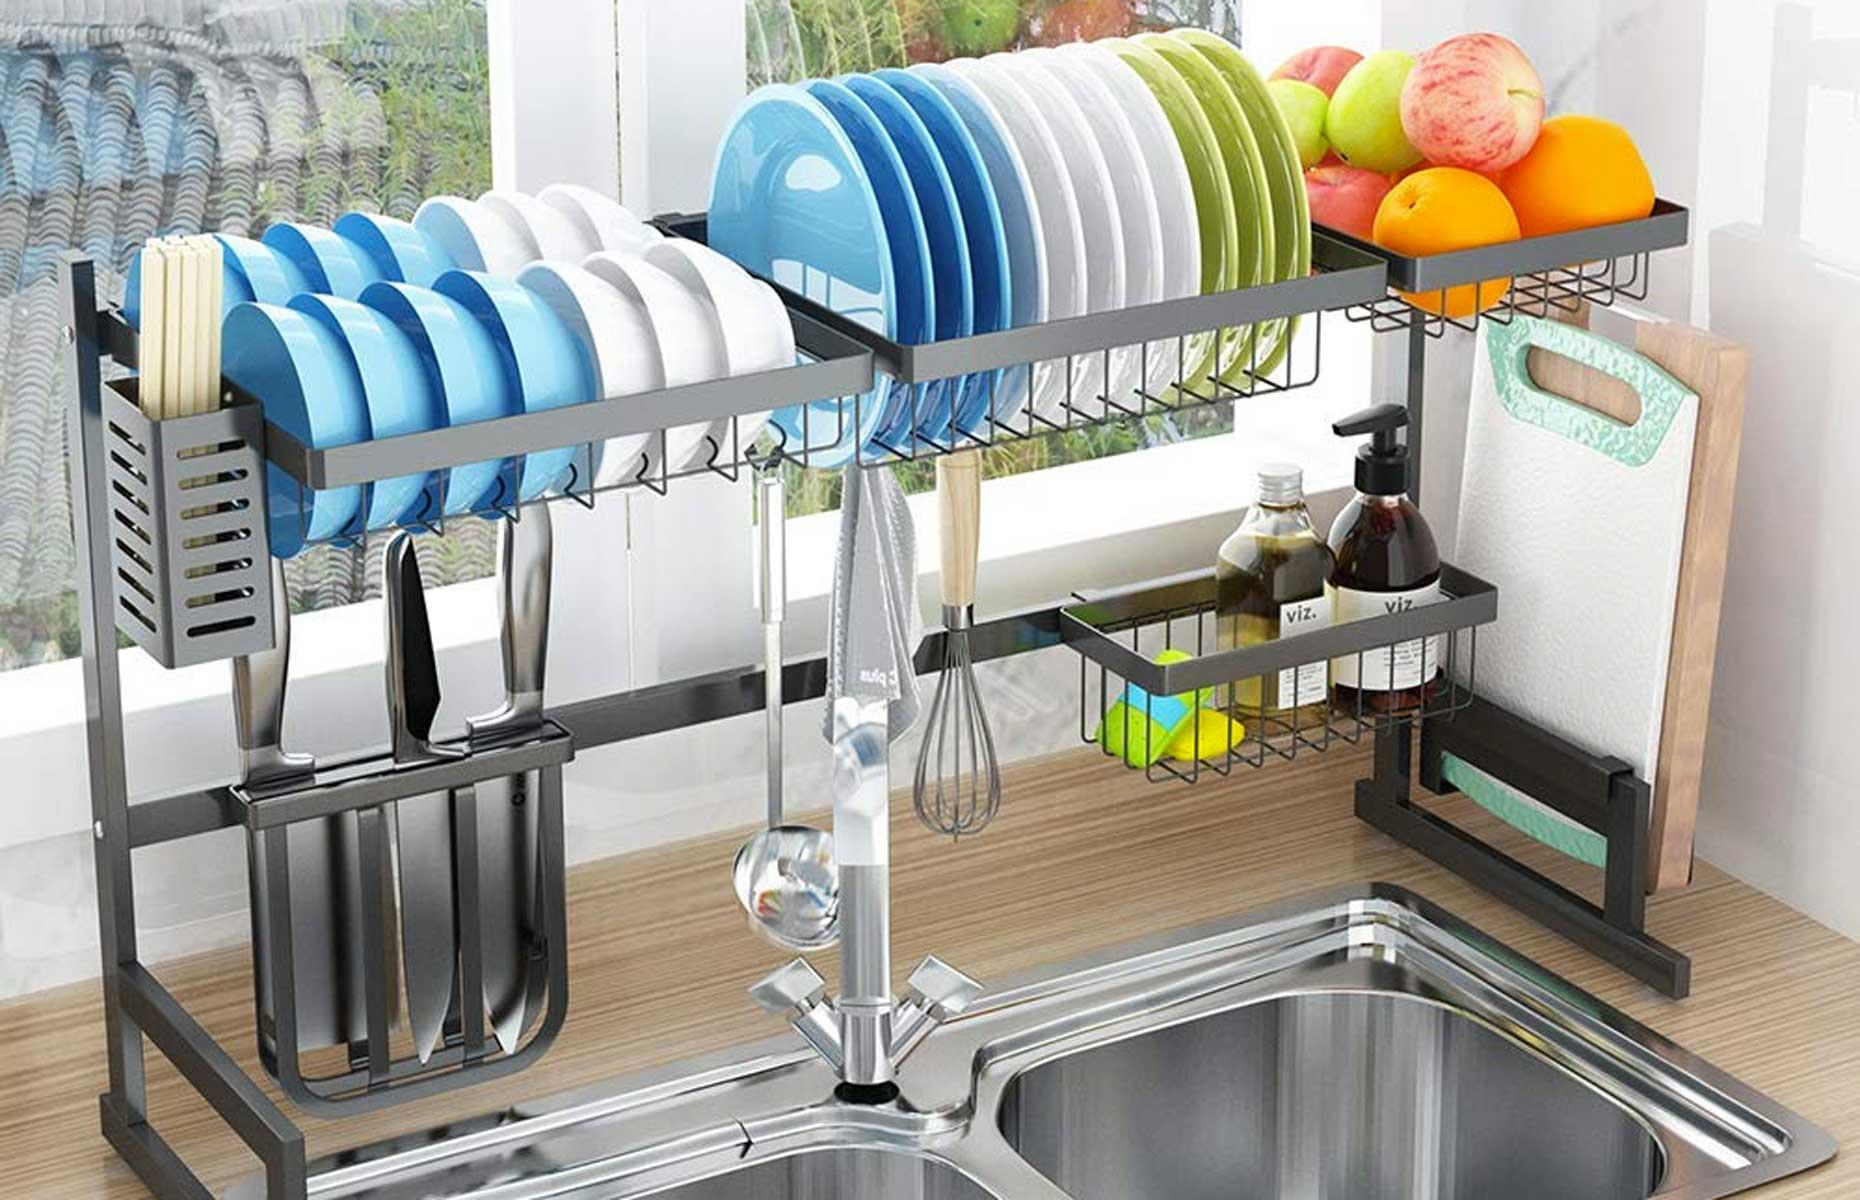 Maximize Countertop Space: Why the Boon Lawn Bottle Drying Rack is a Must-Have for Small Kitchens